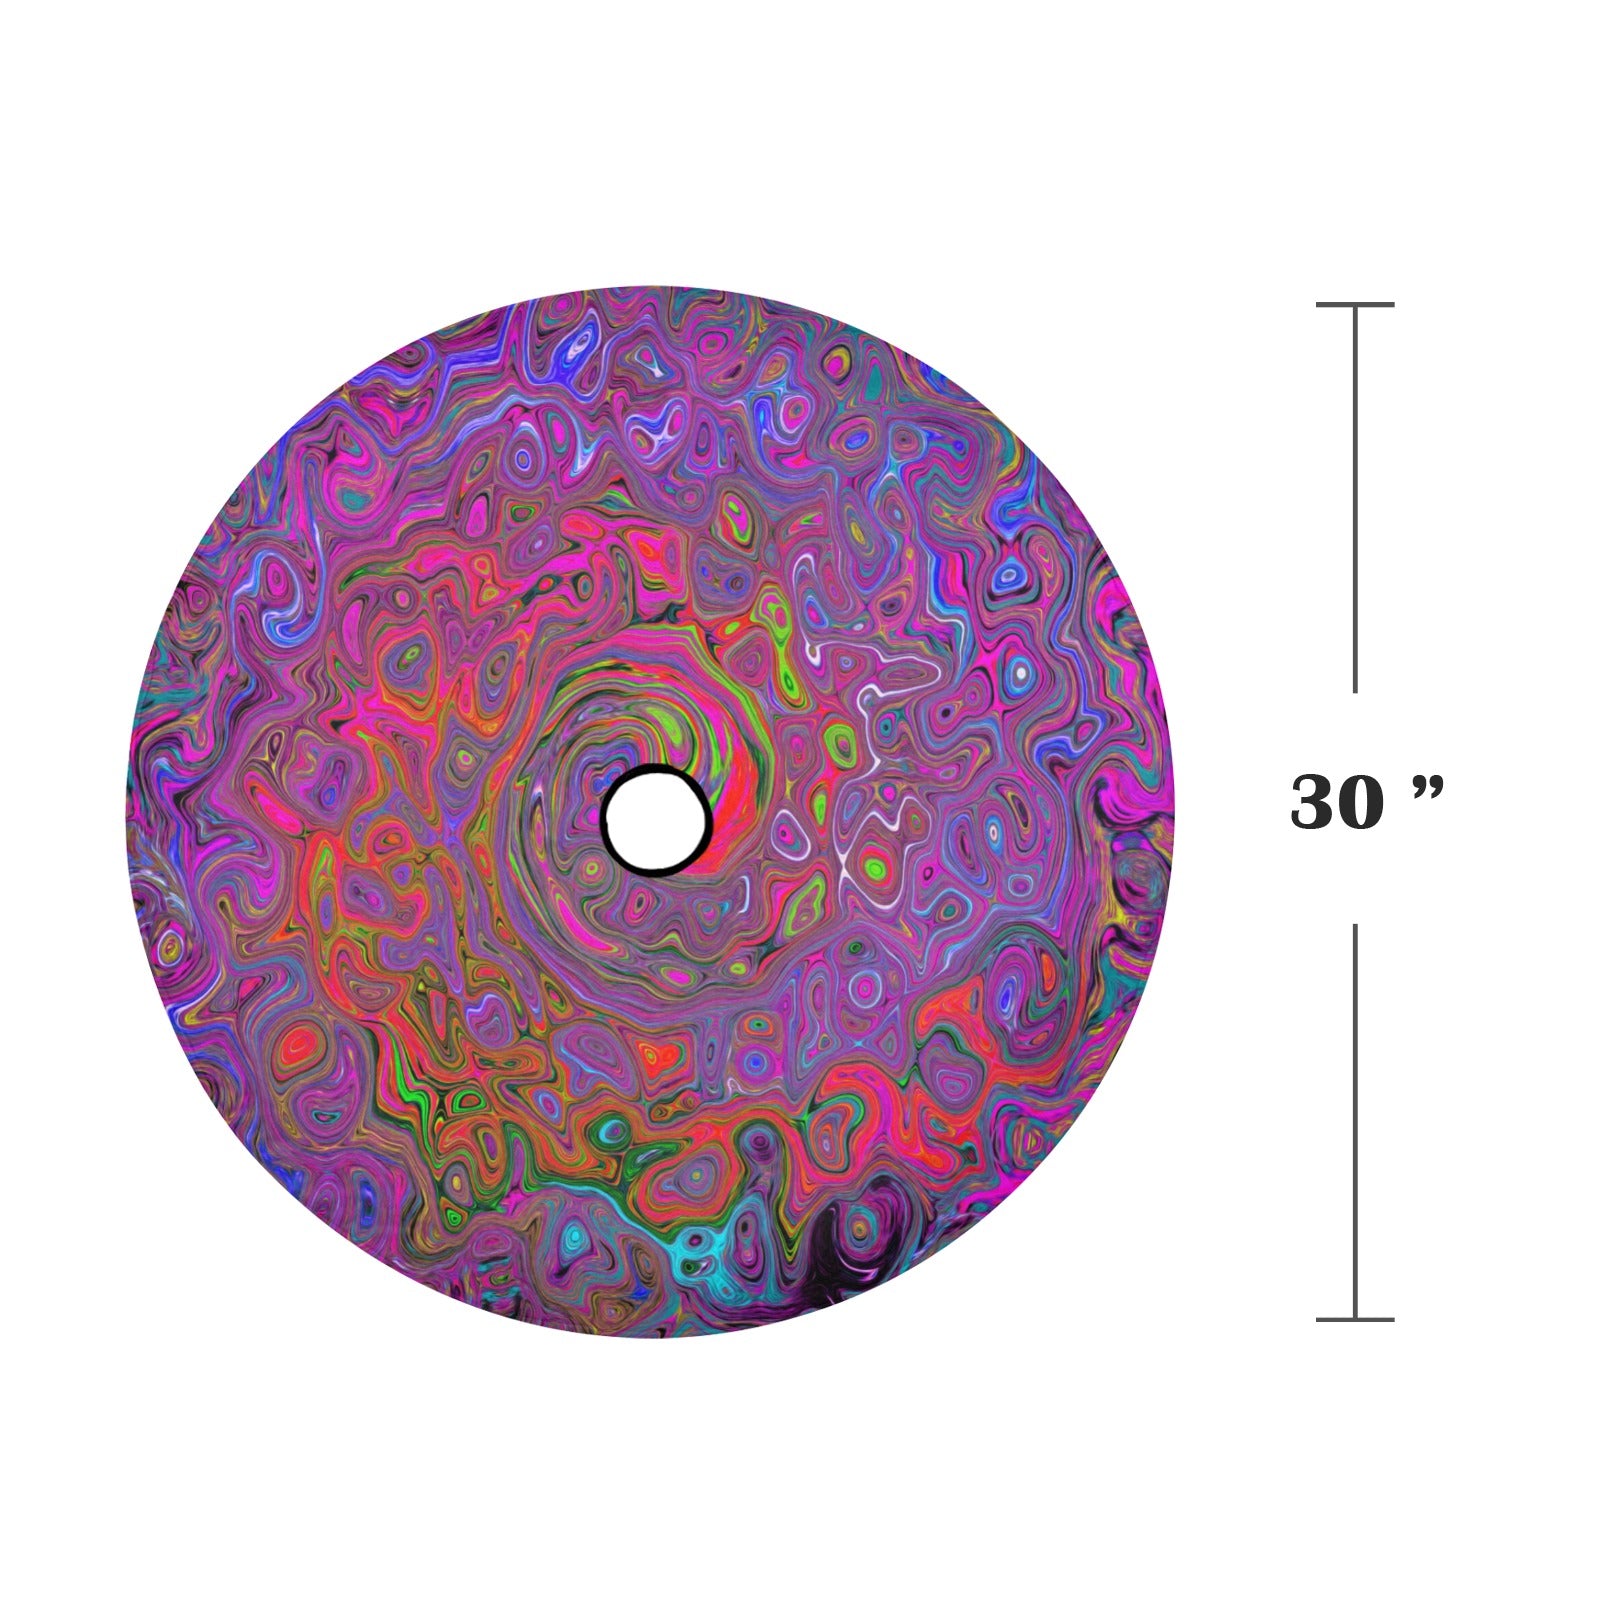 Spare Tire Cover with Backup Camera Hole - Psychedelic Groovy Magenta Retro Liquid Swirl - Small